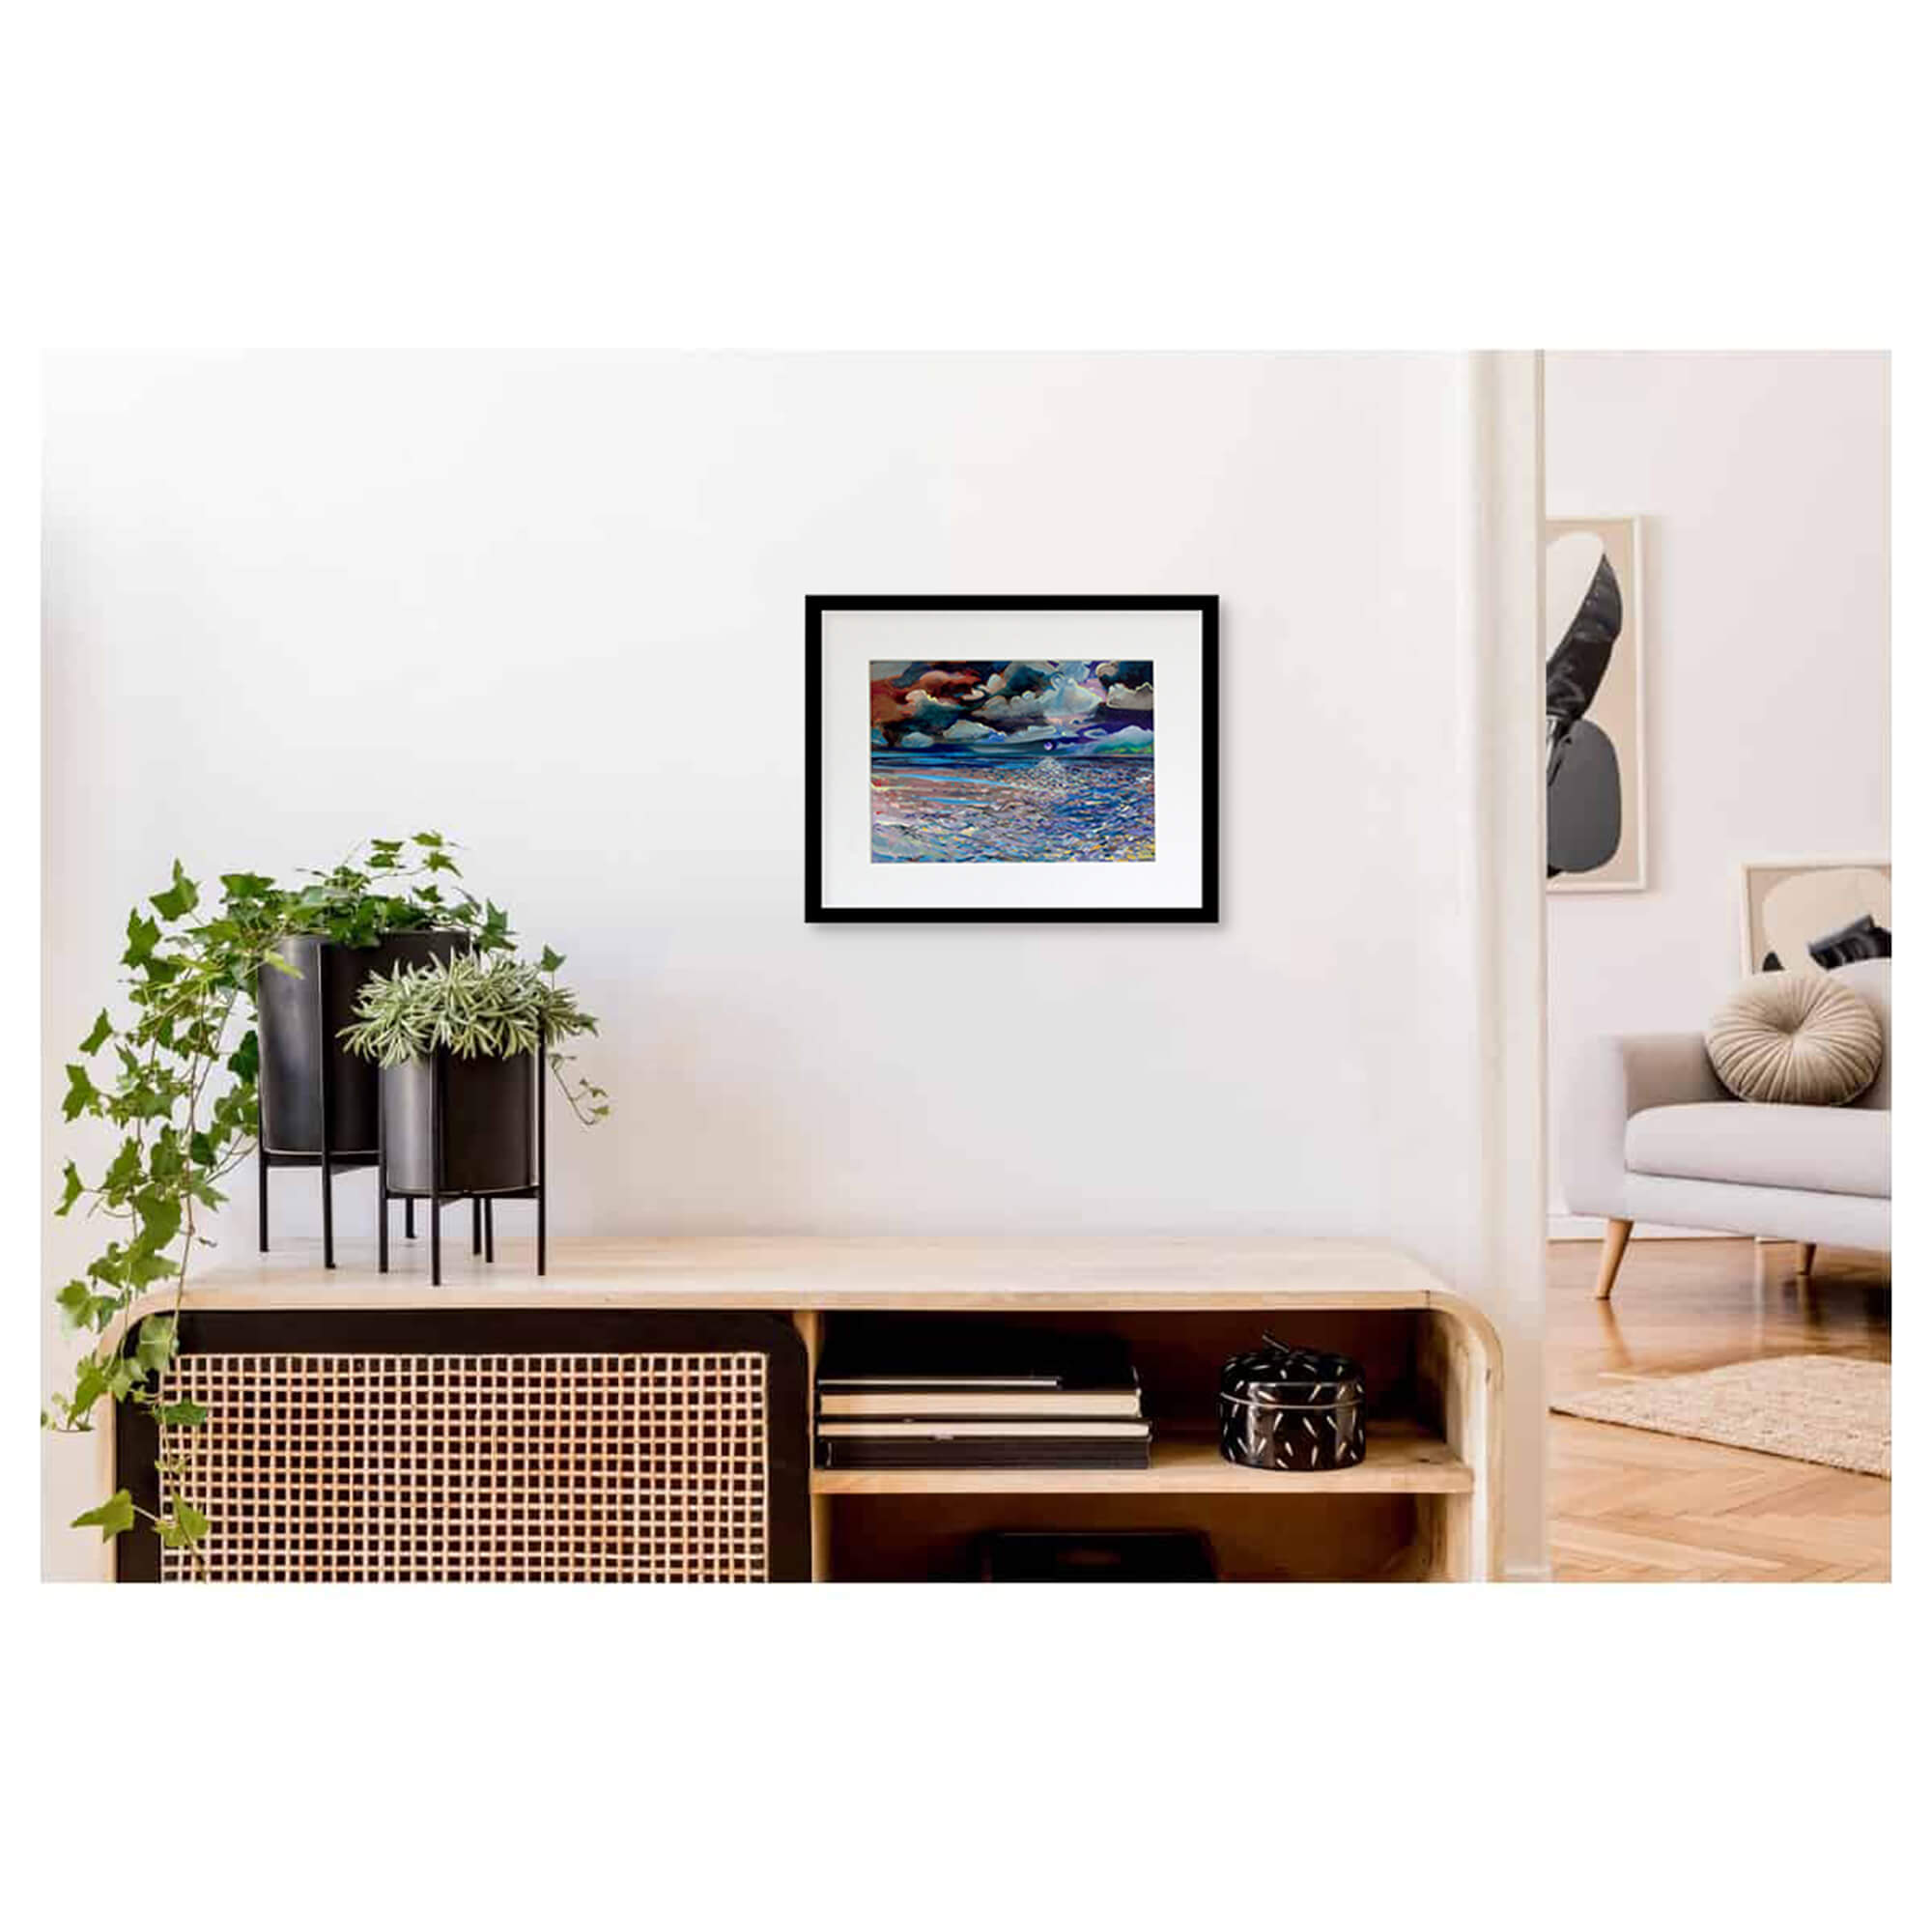 Framed matted art print of an abstract artwork depicting a full moon and a colorful seascape by Hawaii artist Saumolia Puapuaga